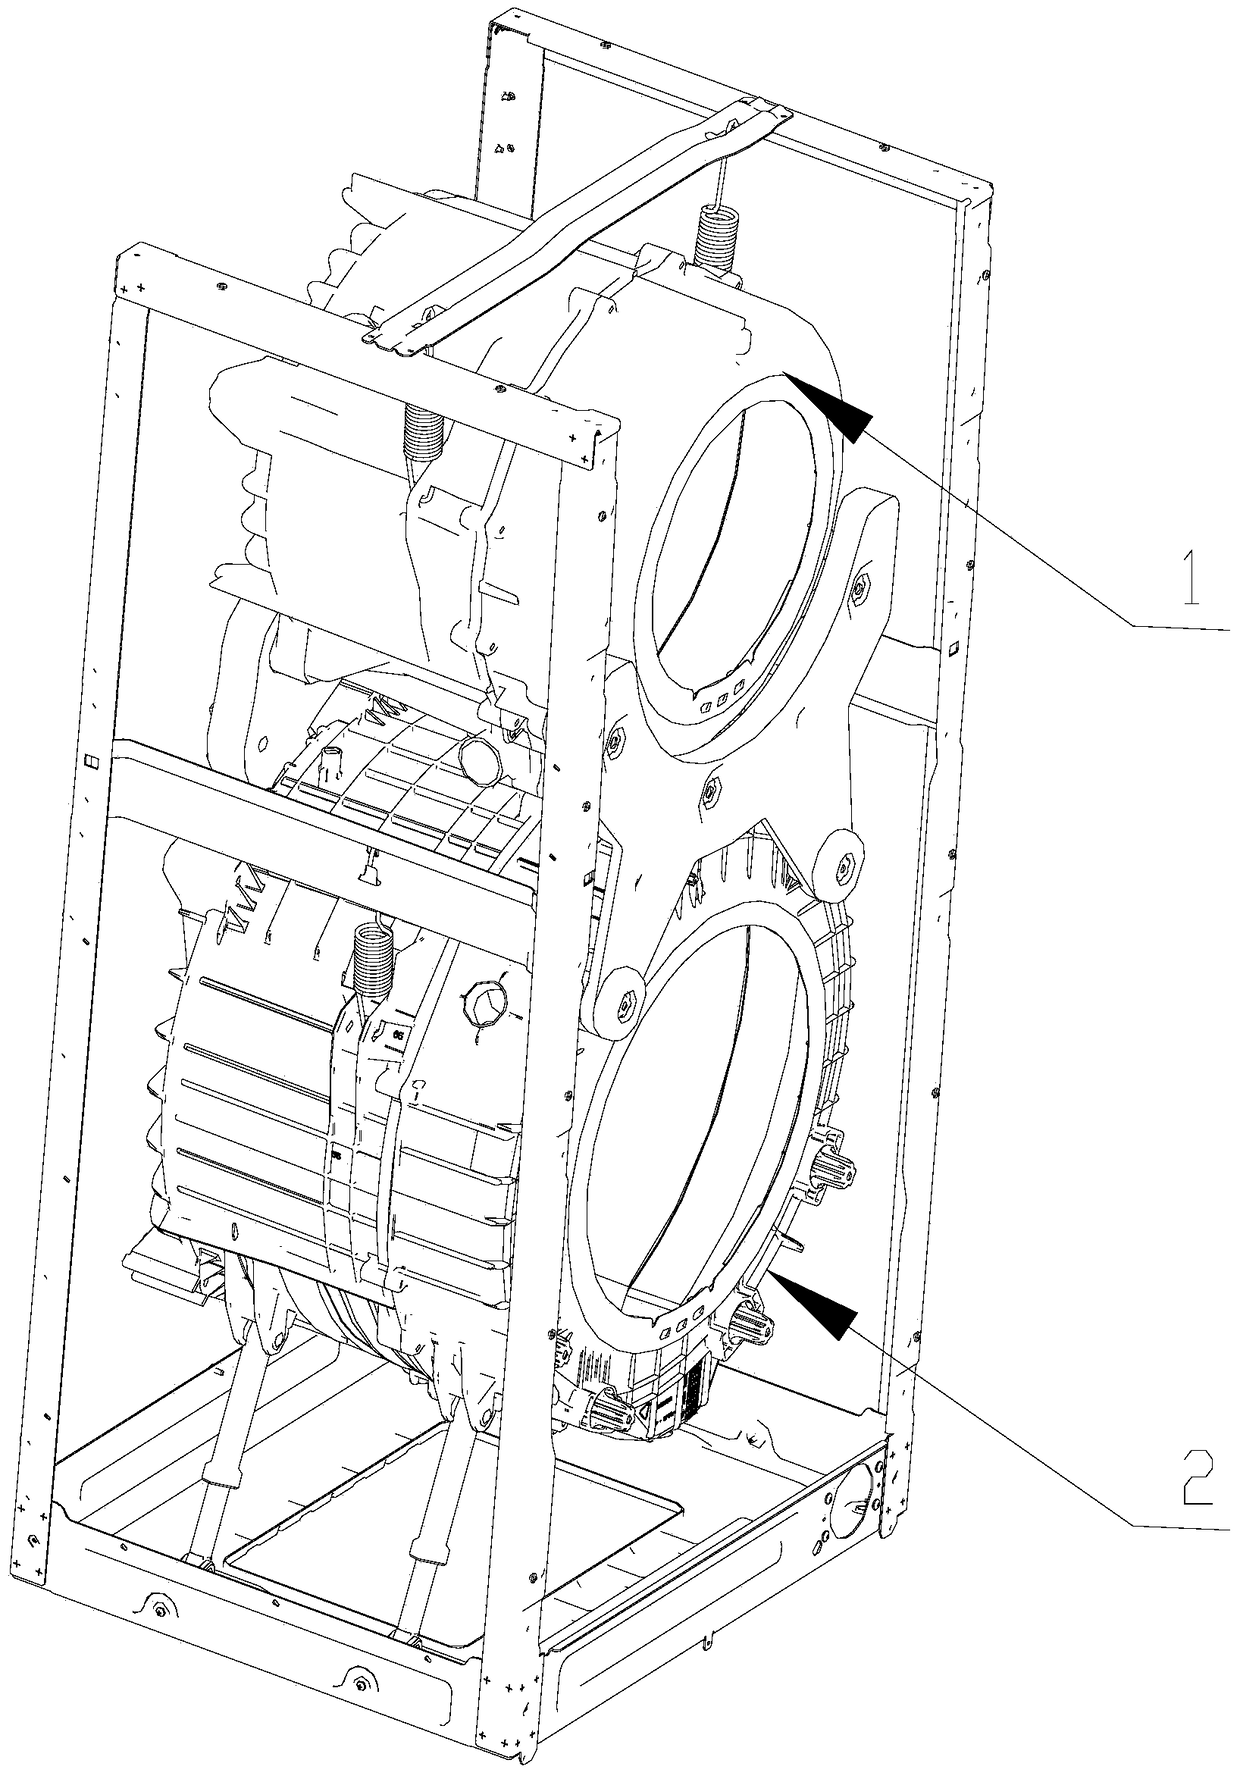 A heating control method for a multi-drum washing machine